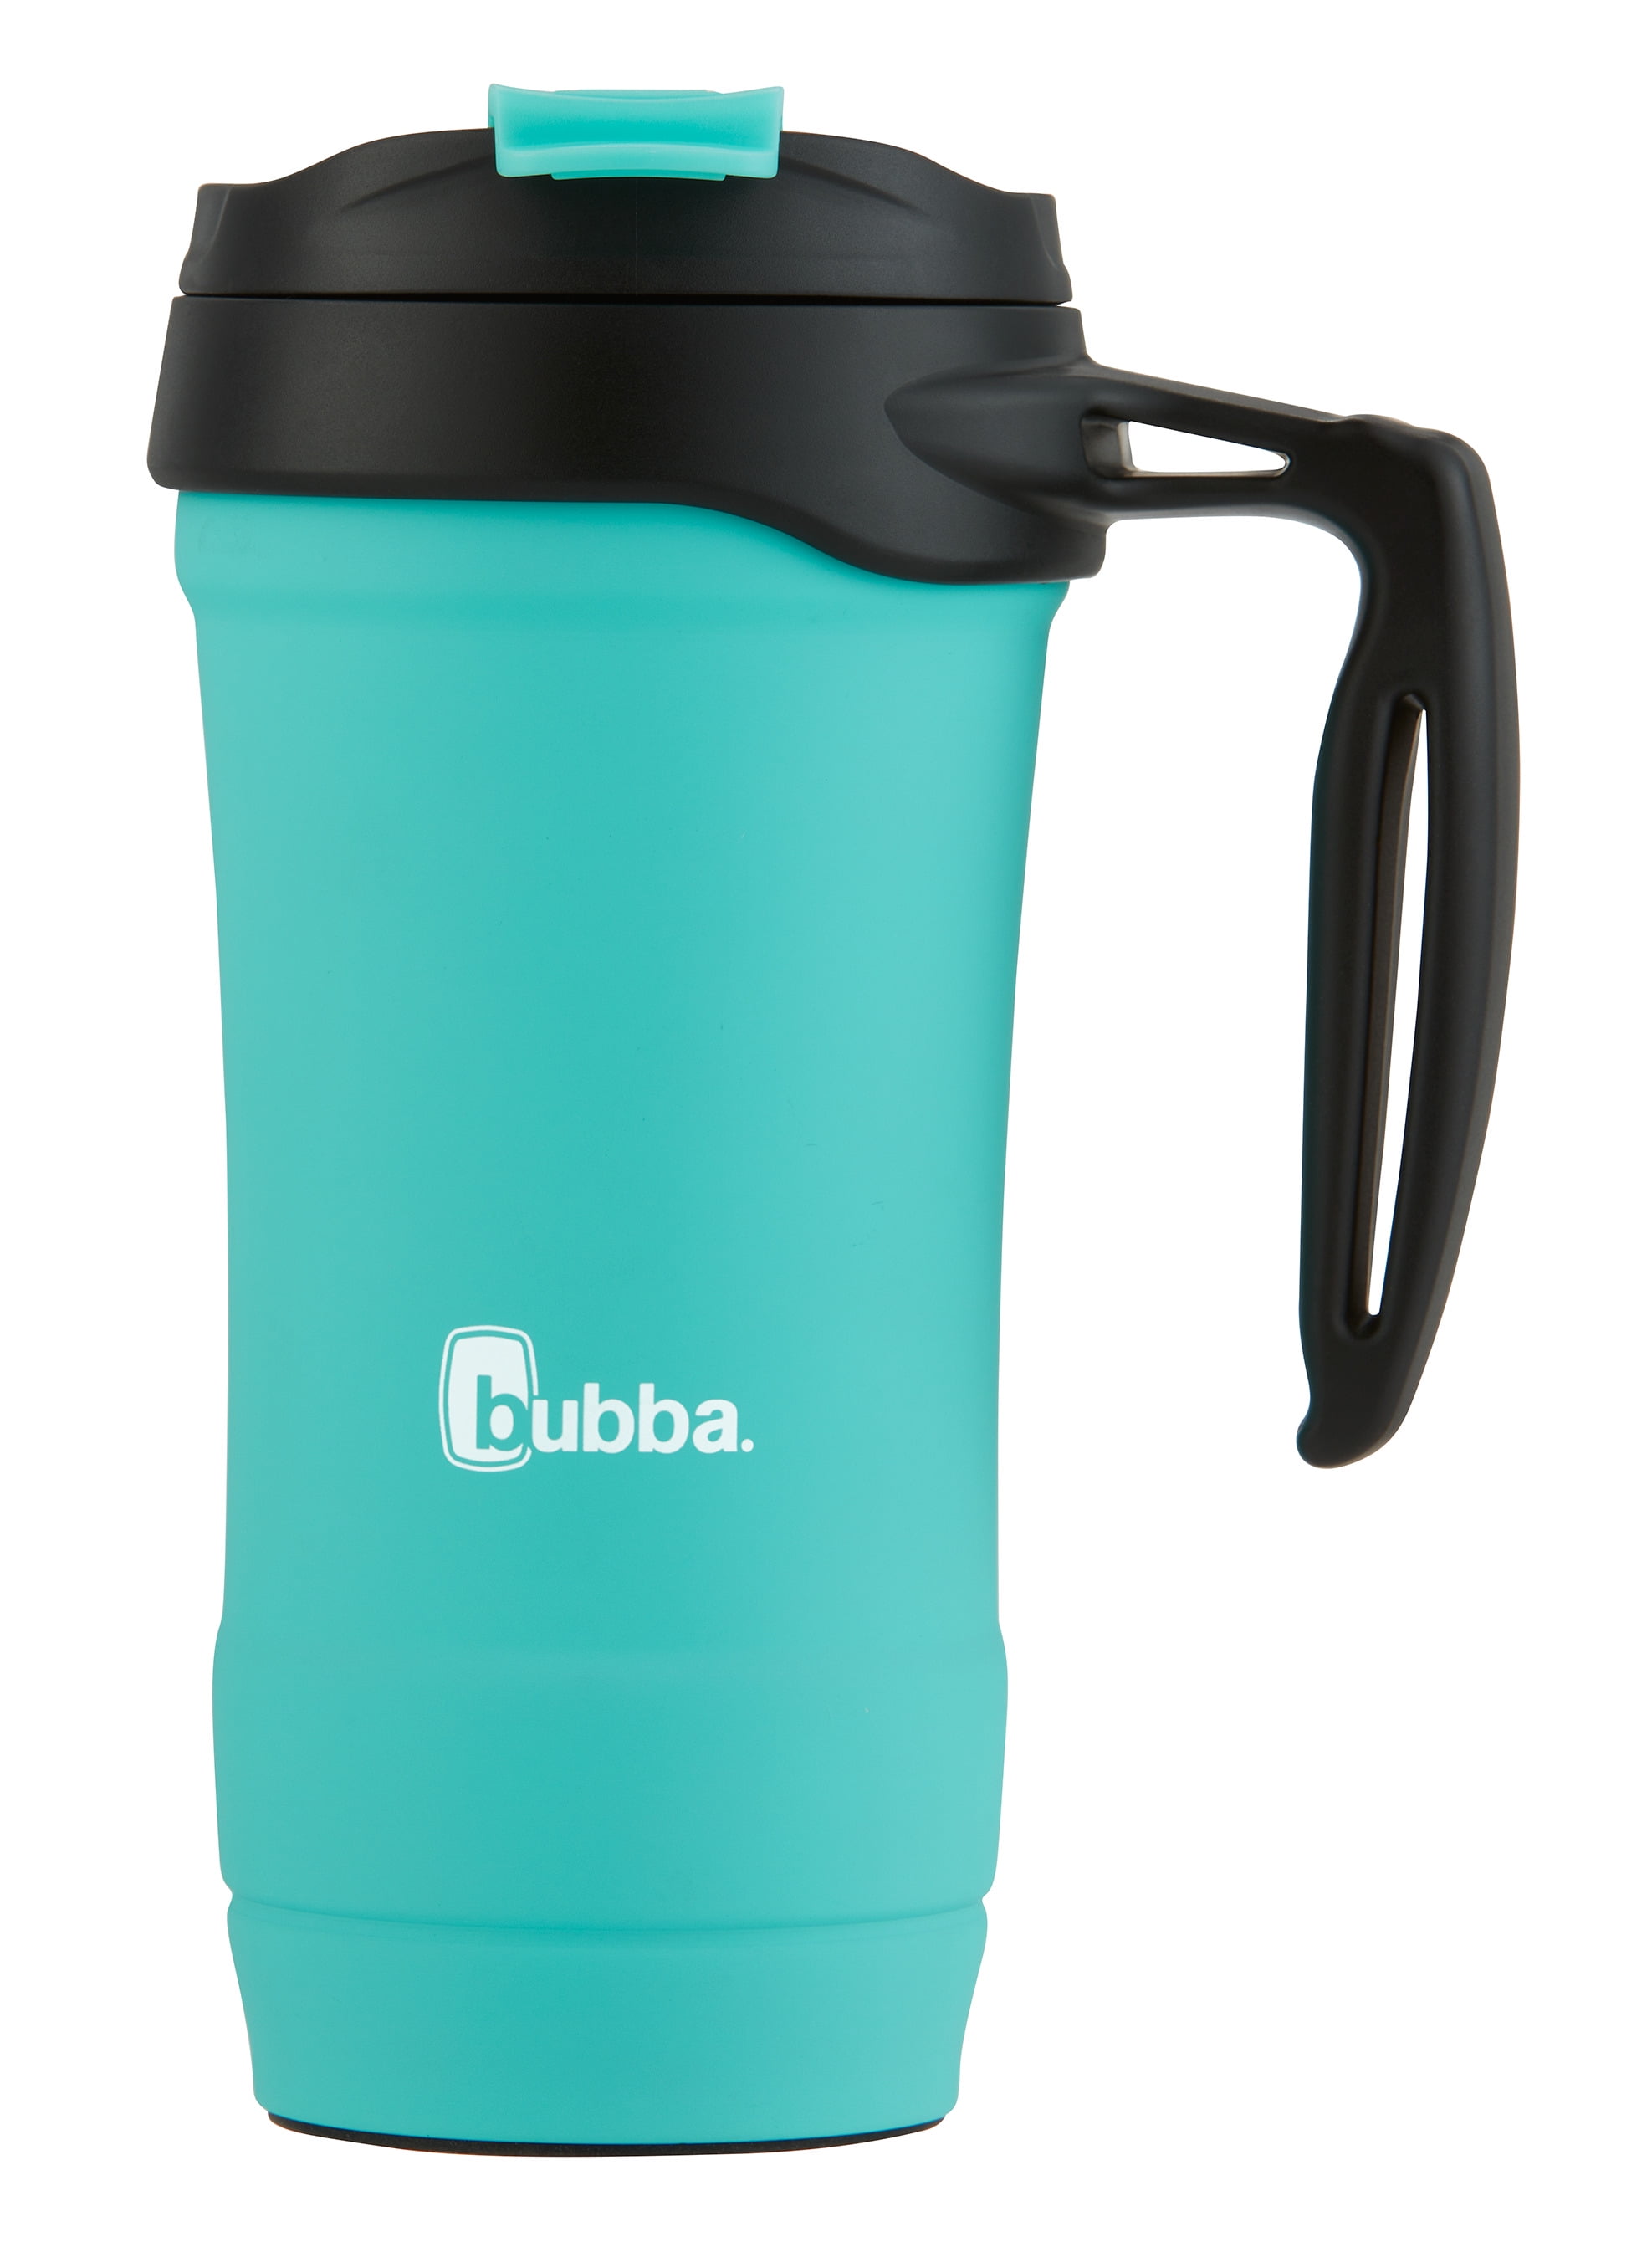 bubba Hero Stainless Steel Mug with Handle Rubberized in Teal, 18 fl oz.